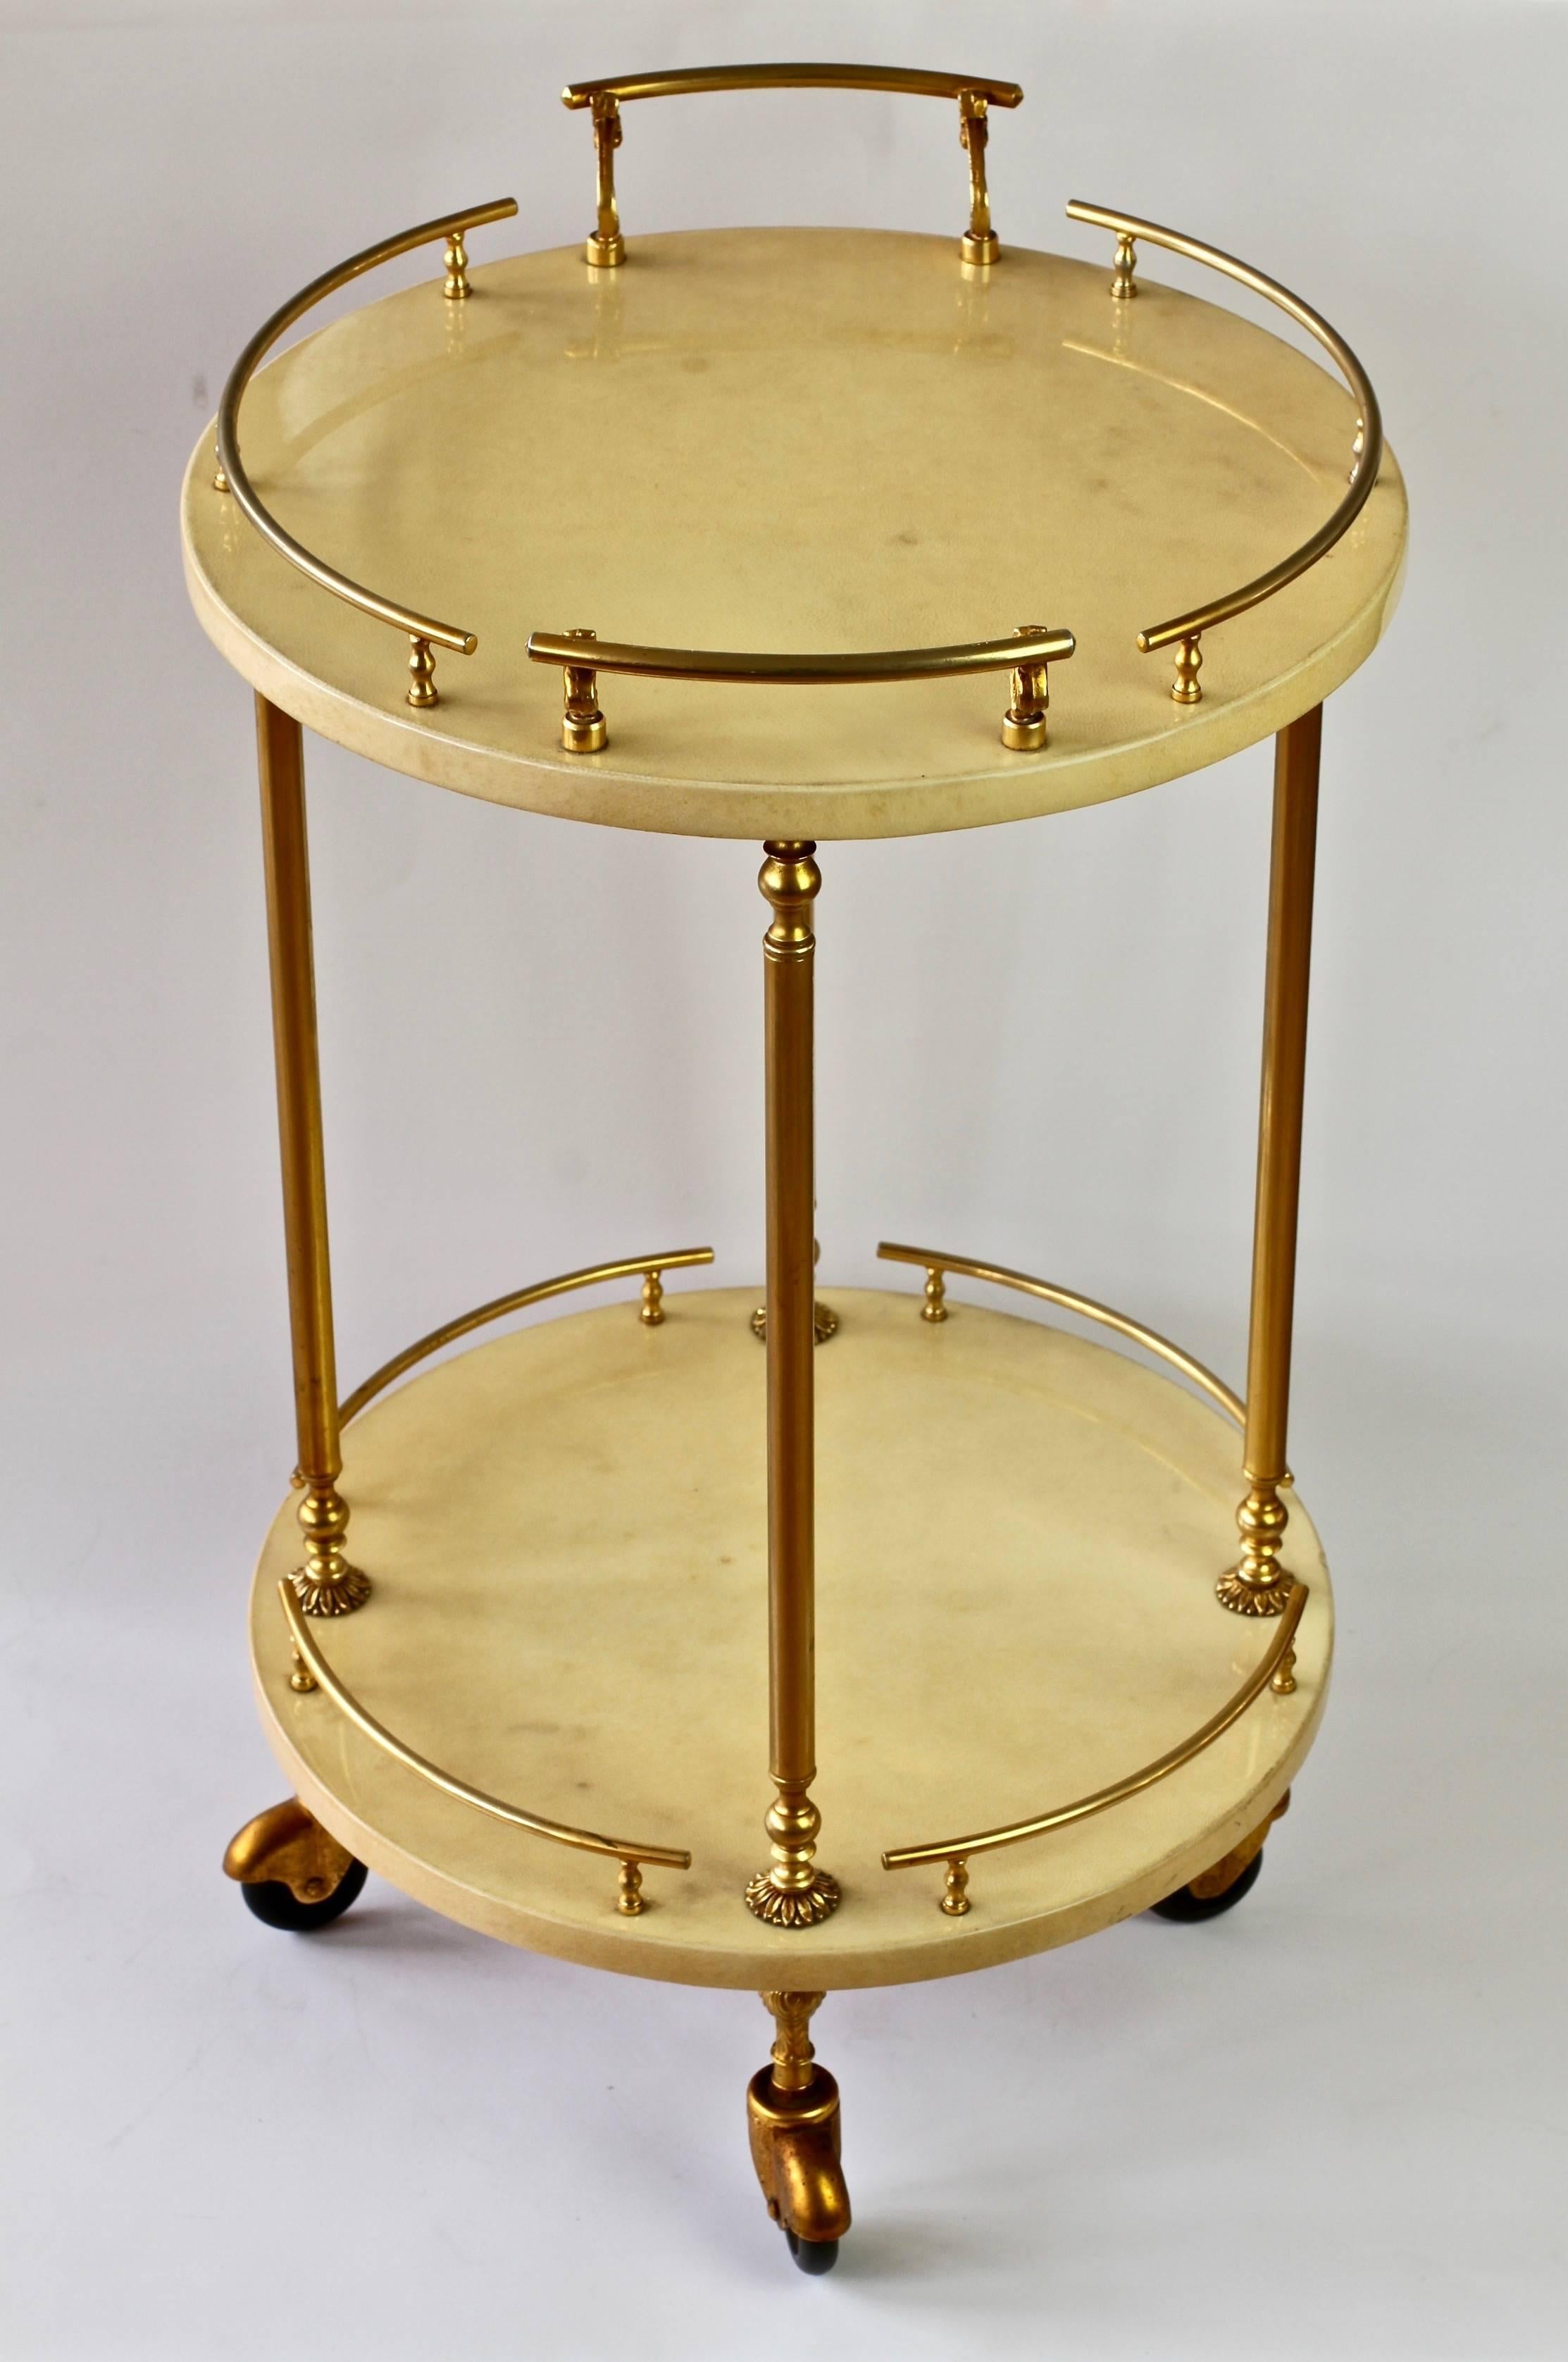 Petite circular Italian 1950s bar cart, drinks trolley by Aldo Tura, Milan. Beautiful cream colored and lacquered goatskin leather combined with gilded cast metal handles, rails and finals.

Although no 'Tura Milano' label is present - we are